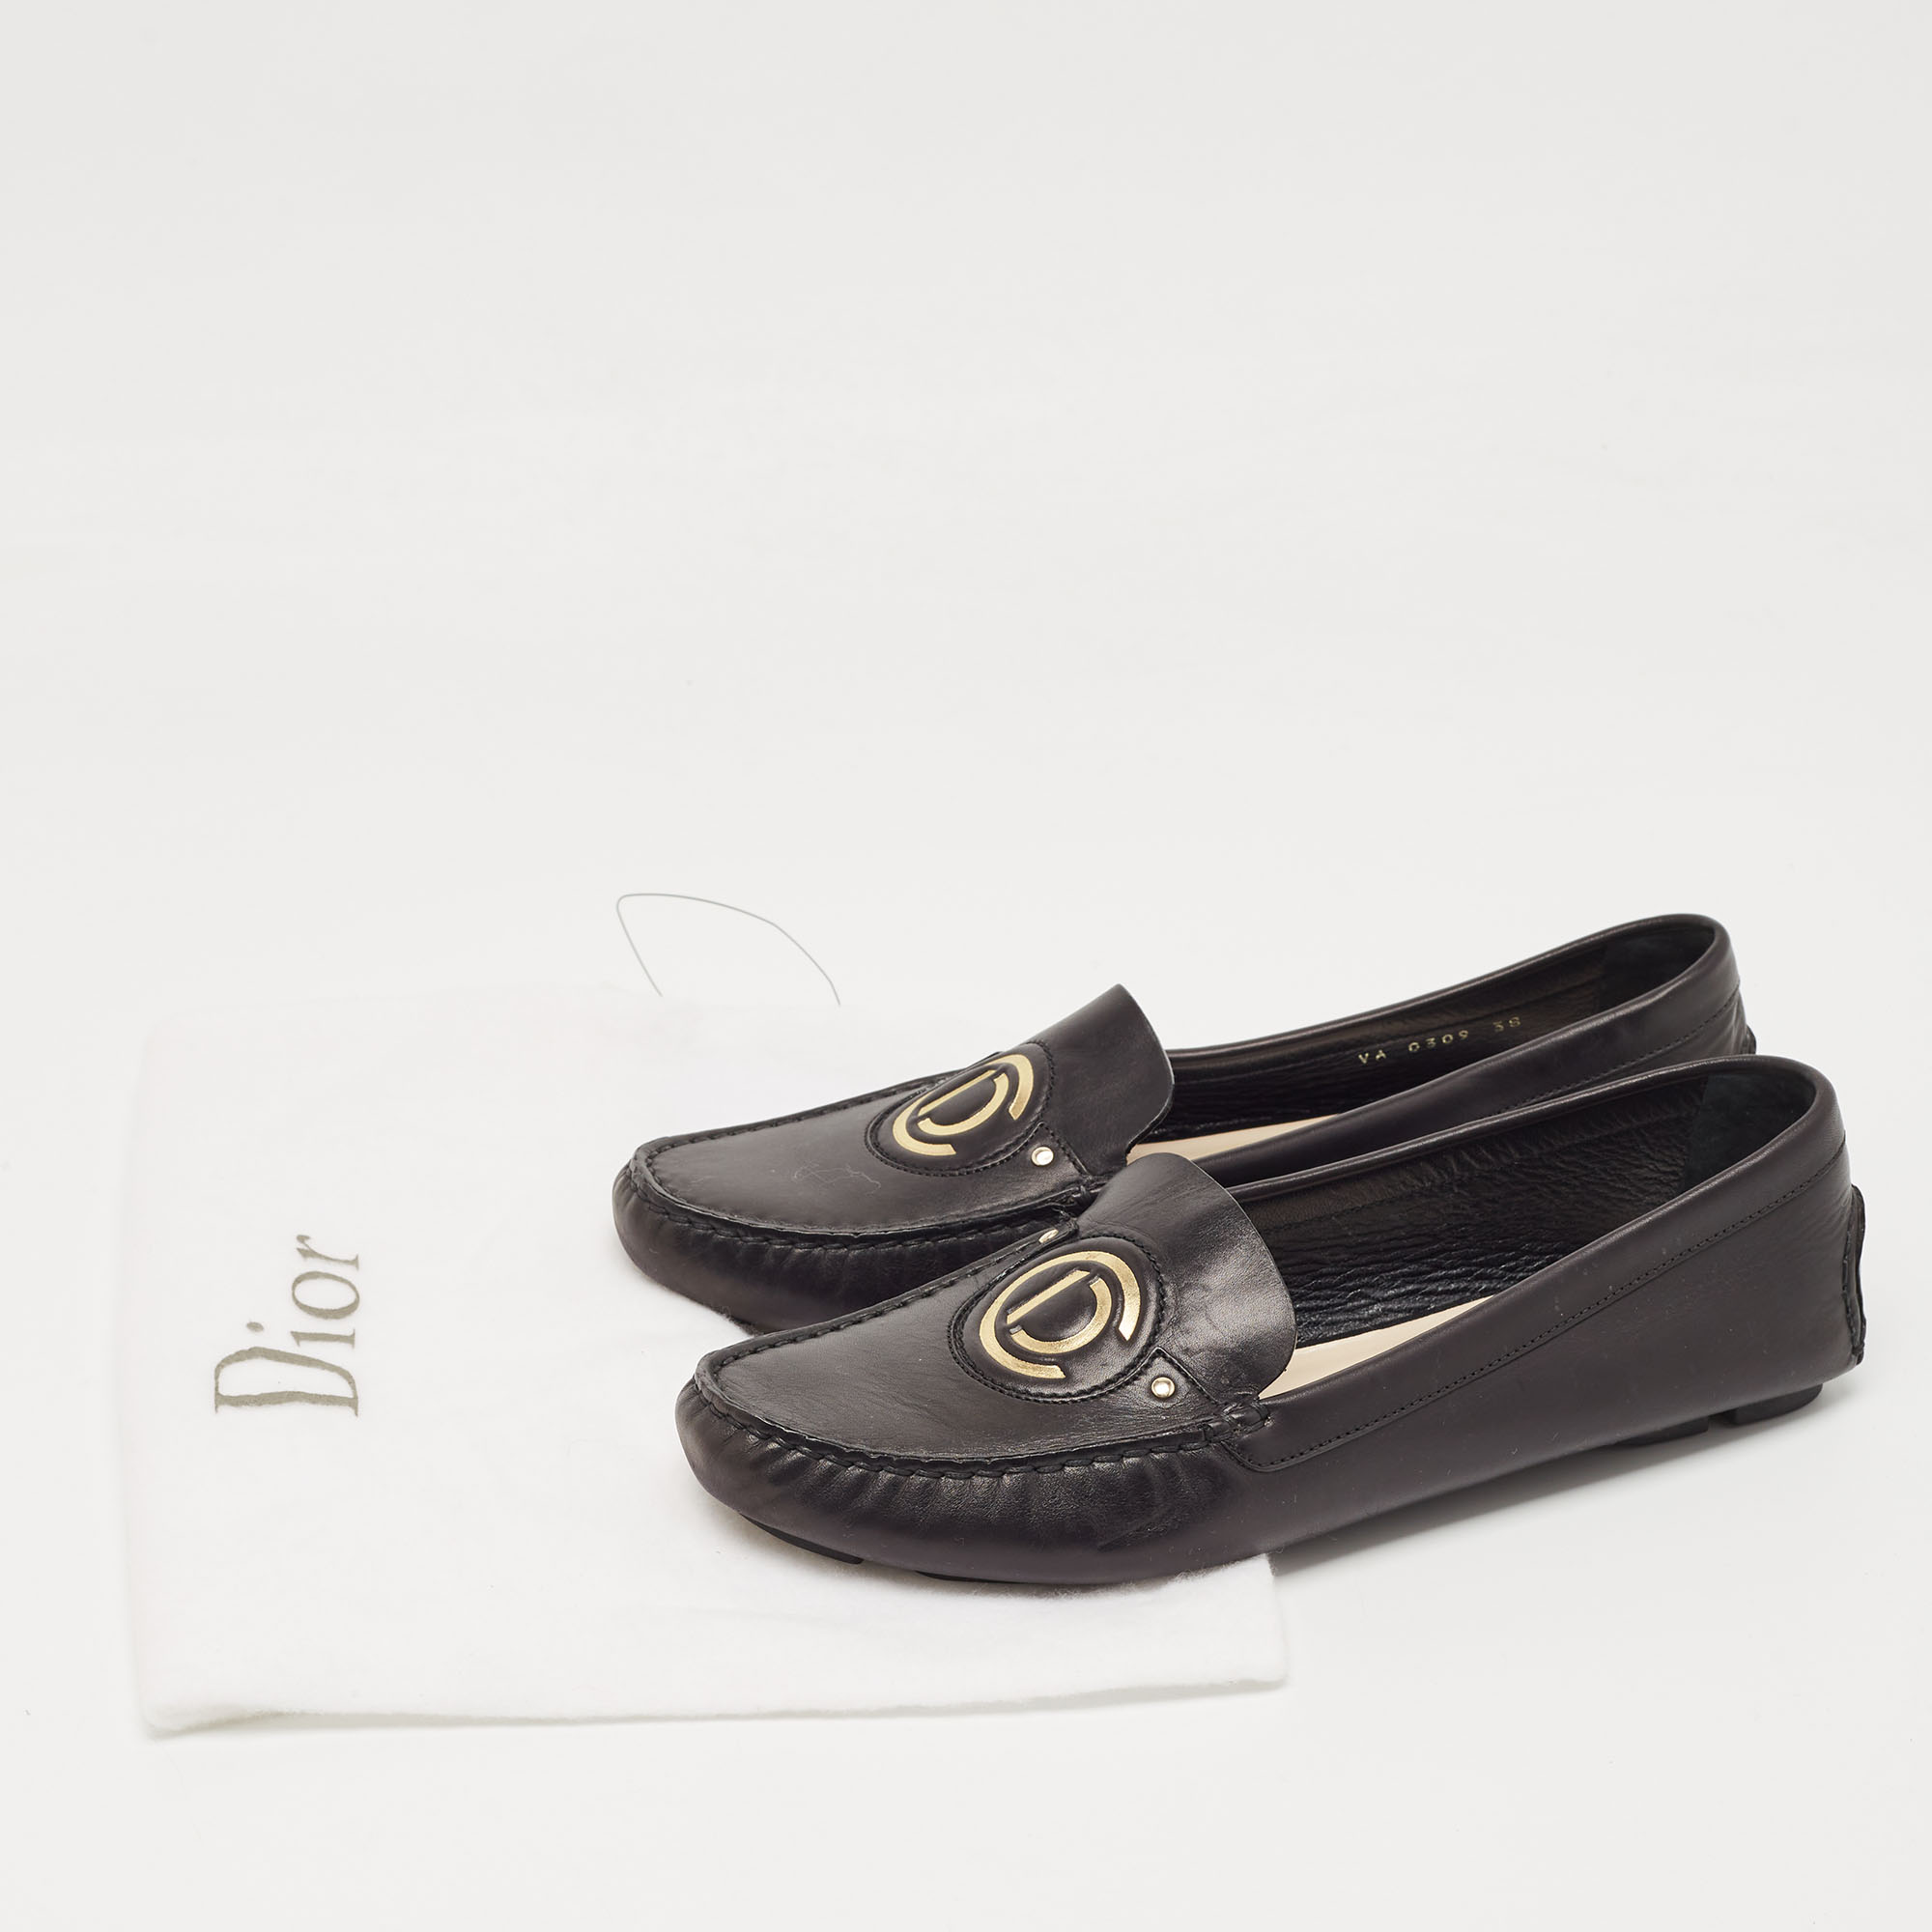 Dior Black Leather Slip On Loafers Size 38